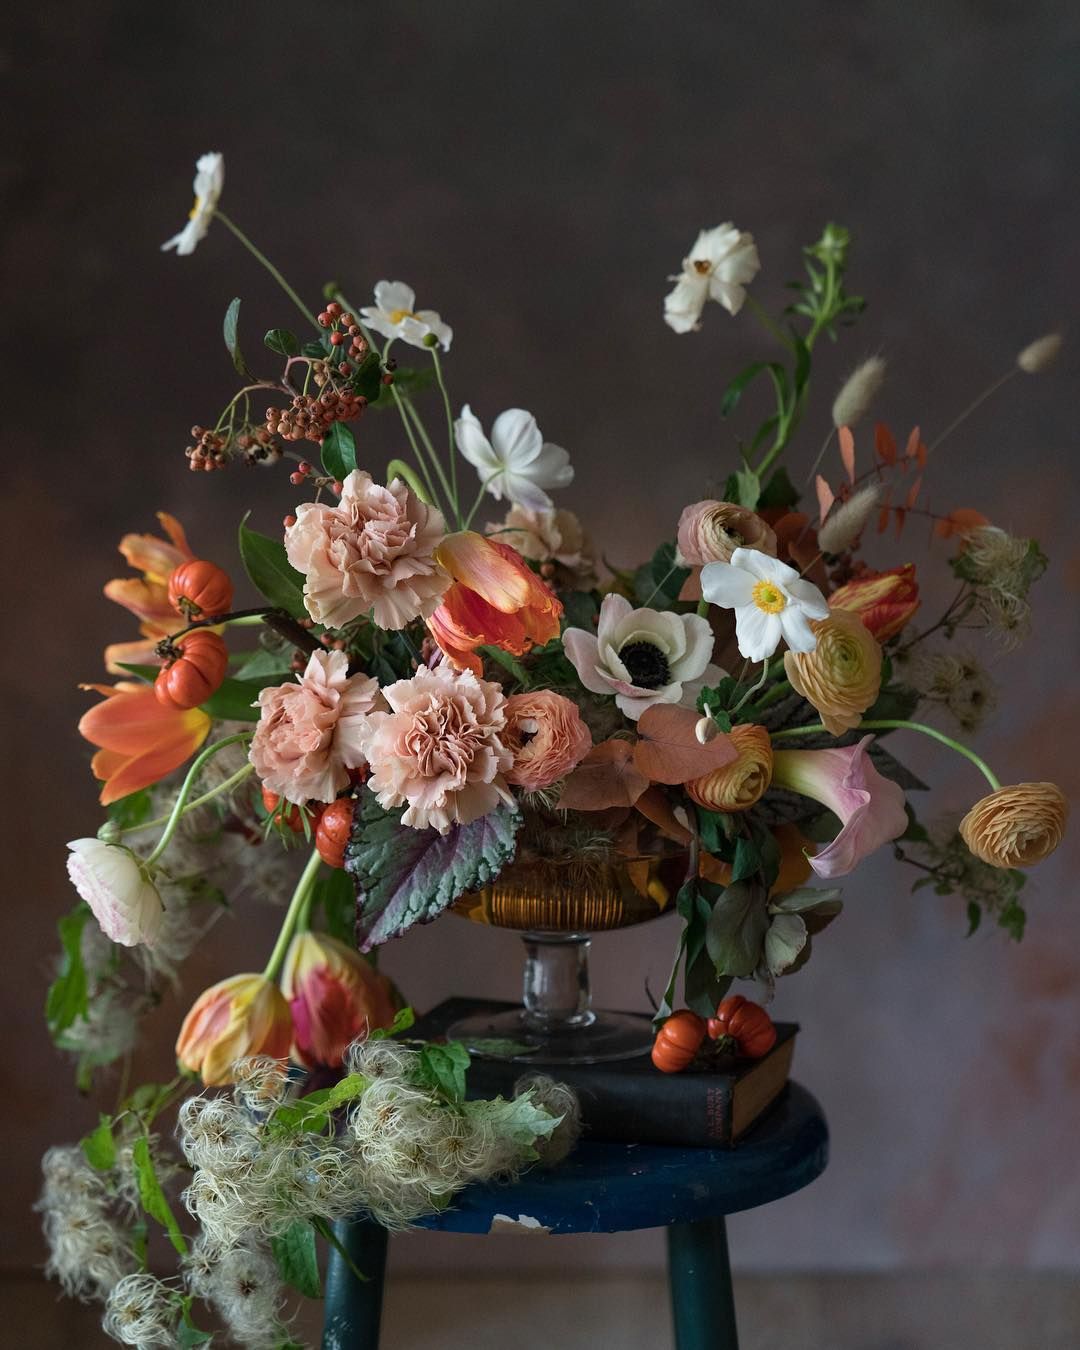 todays-digital-wave-in-floristry-is-craftsmanship-featured